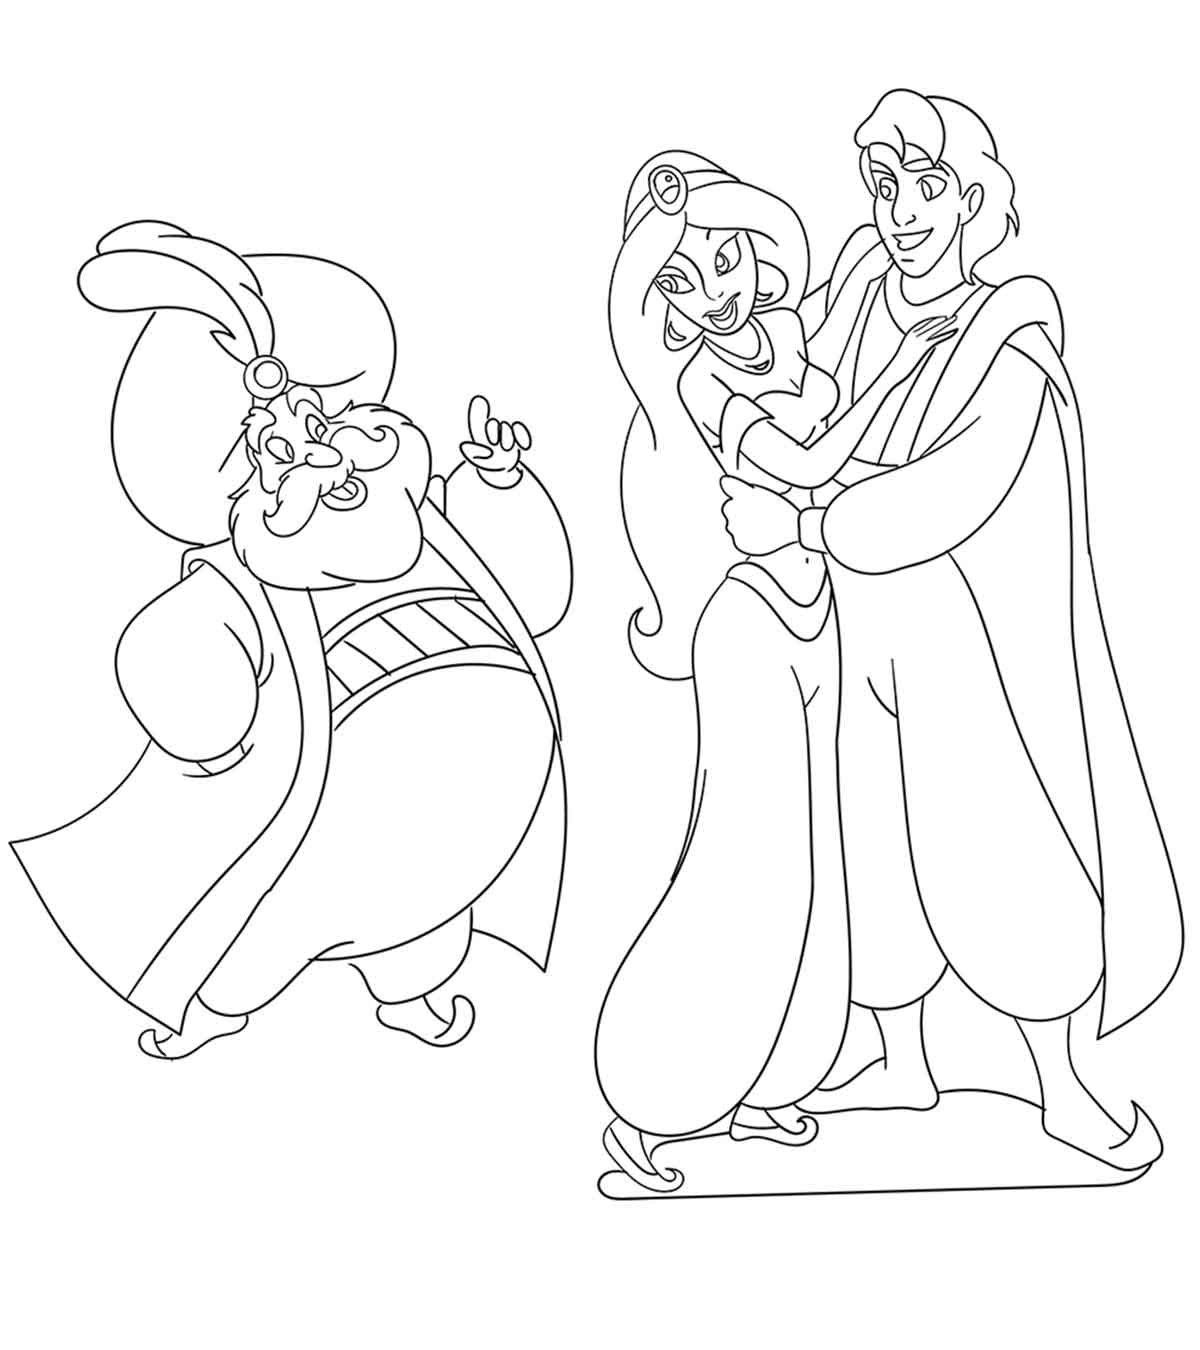 Top 10 Princess Jasmine Coloring Pages For Your Toddler_image